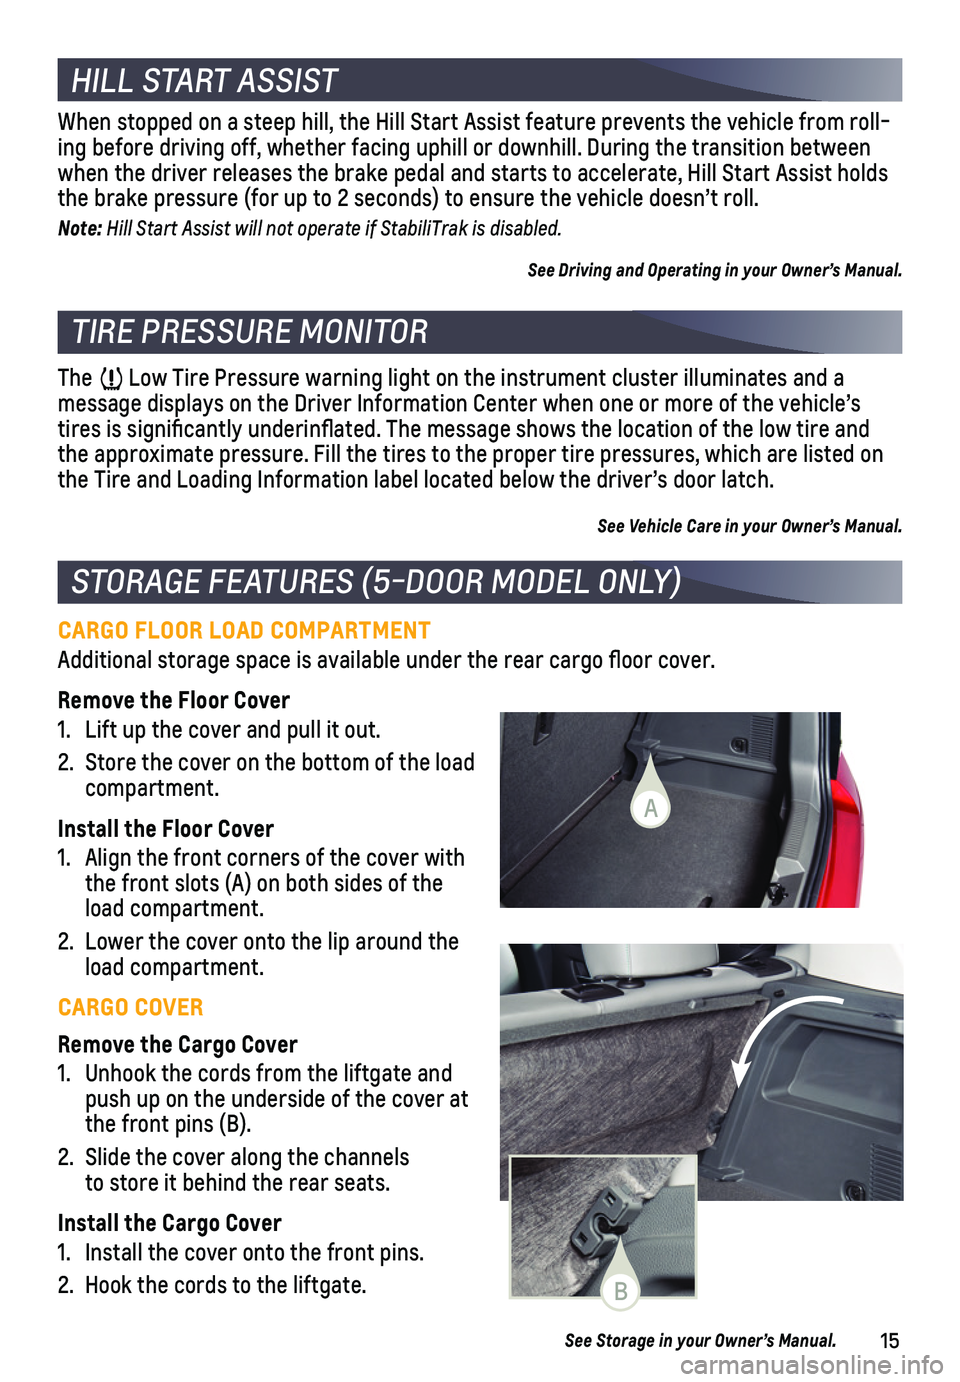 CHEVROLET SONIC 2020  Get To Know Guide 15
CARGO FLOOR LOAD COMPARTMENT
Additional storage space is available under the rear cargo floor cover\
. 
Remove the Floor Cover
1. Lift up the cover and pull it out.
2. Store the cover on the bottom